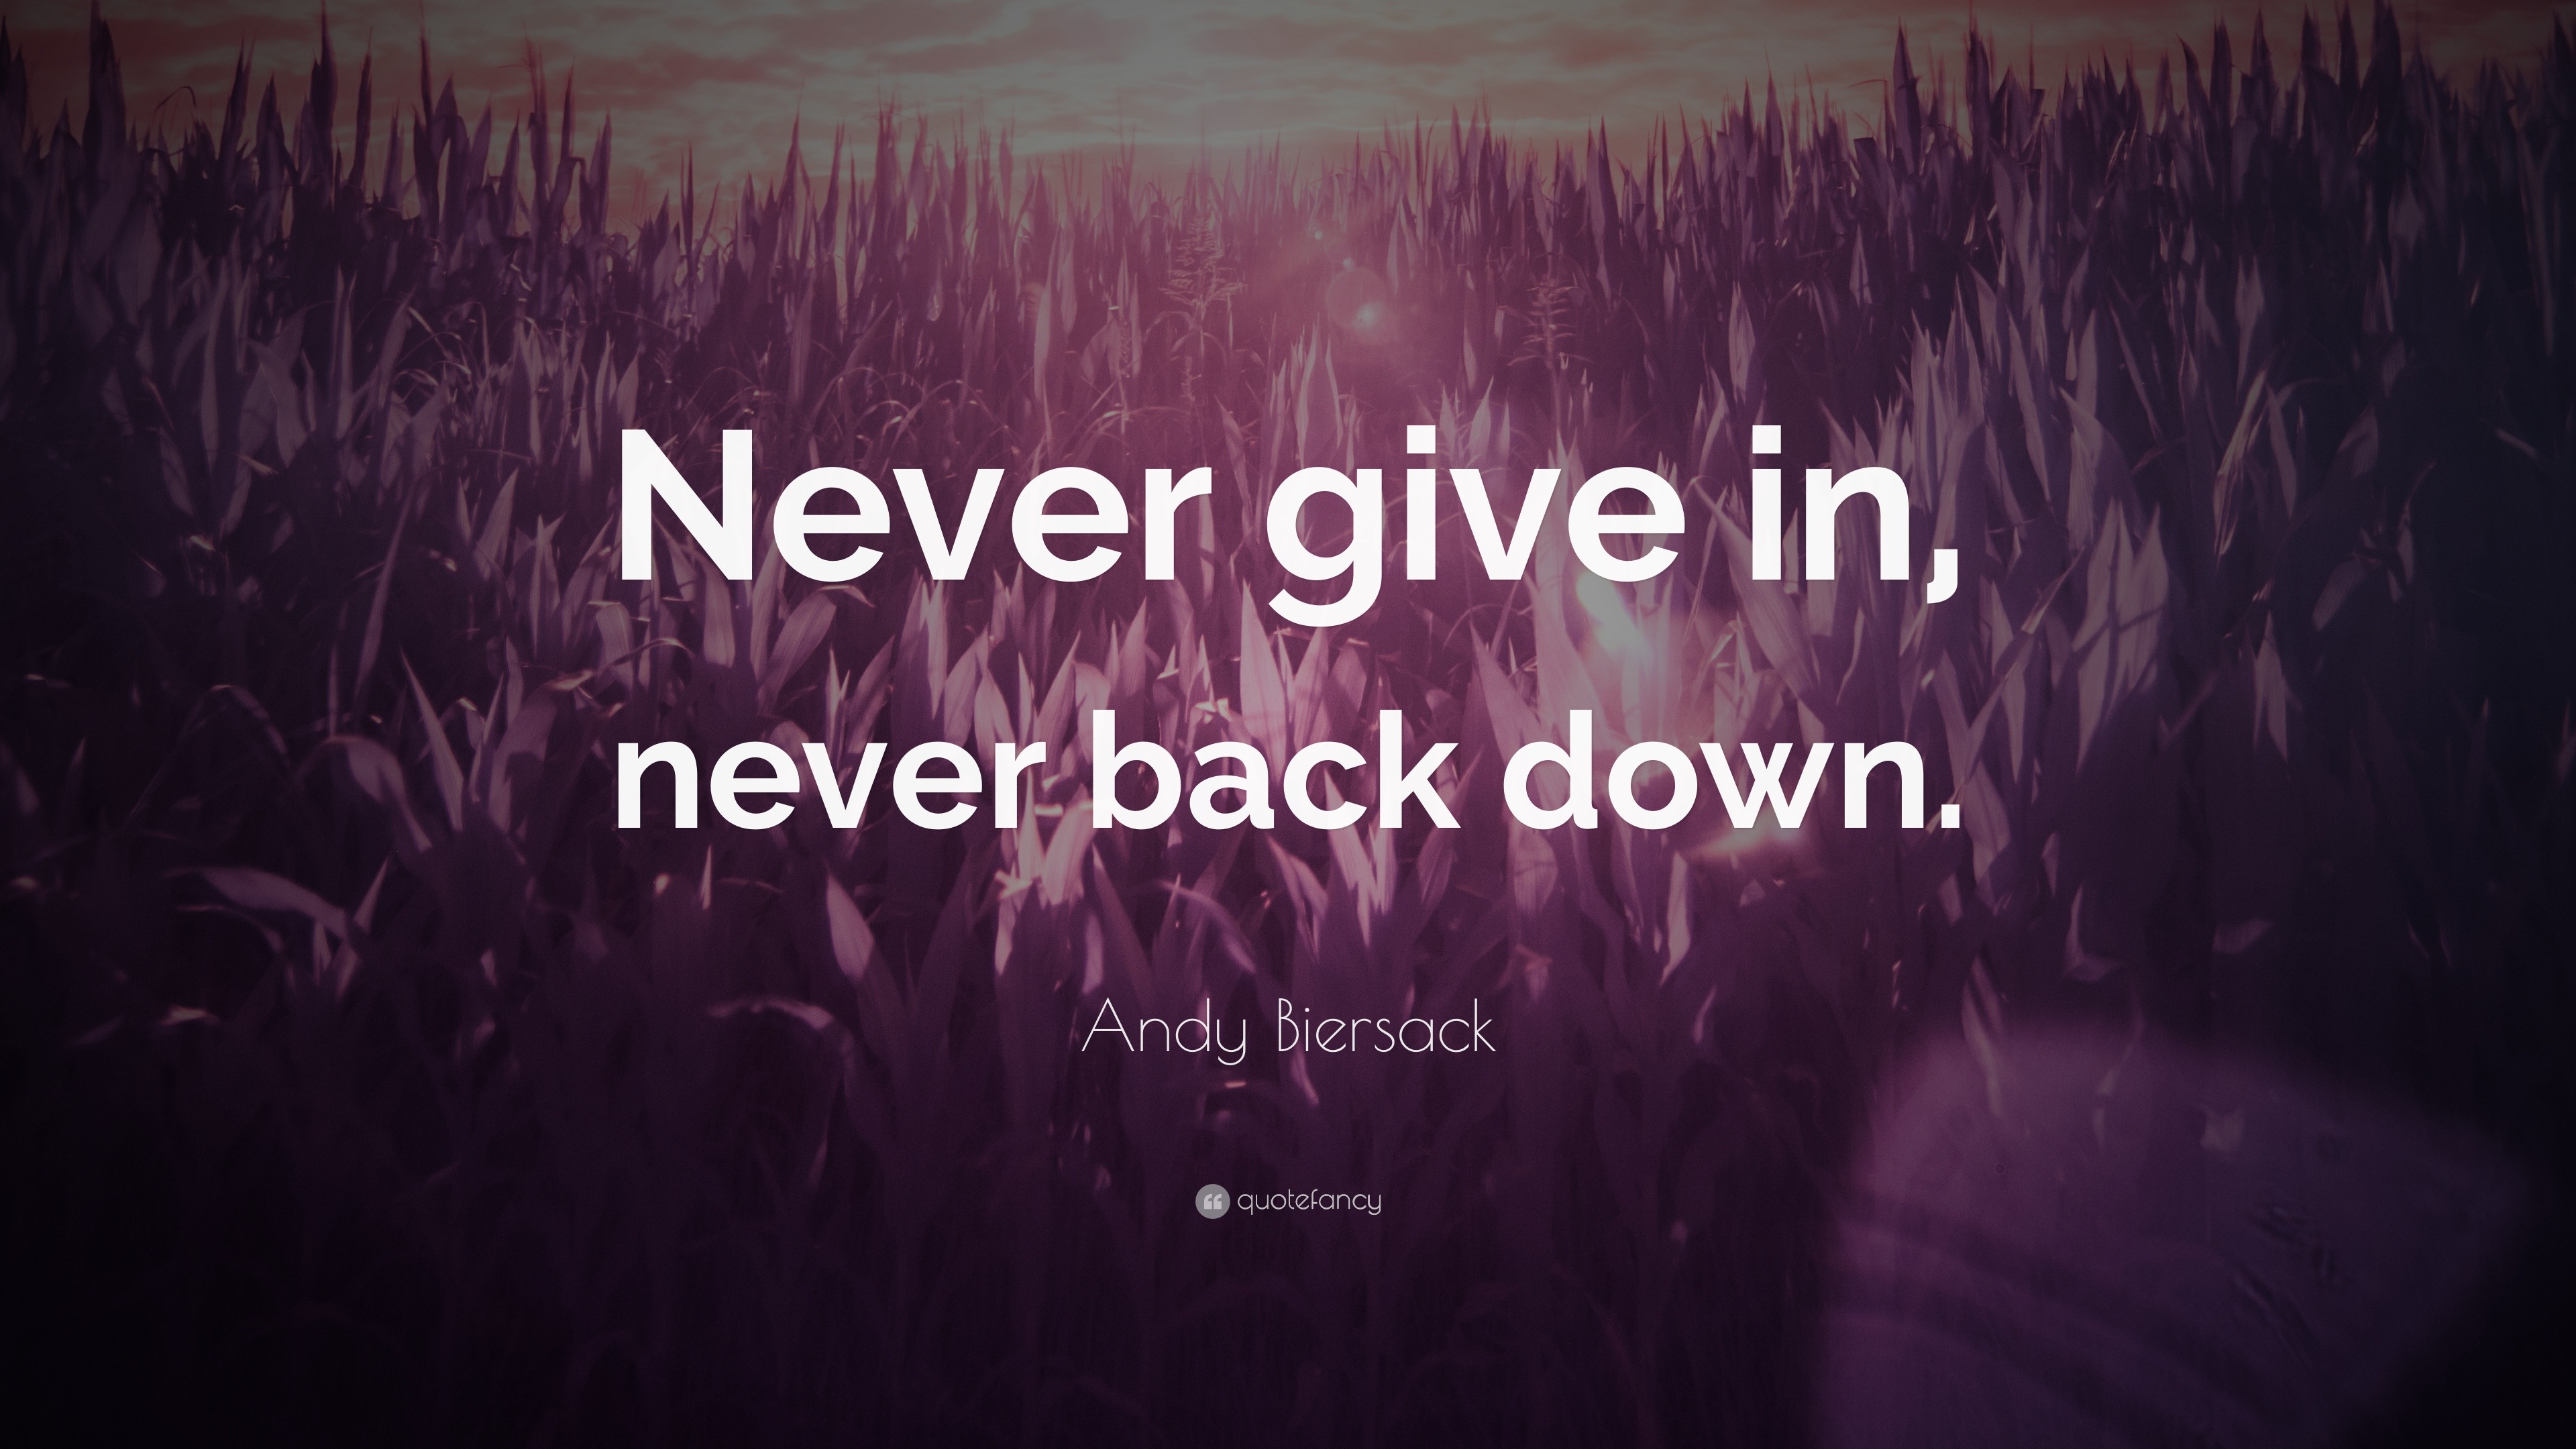 Andy Biersack Quote: “Never give in, never back down.”